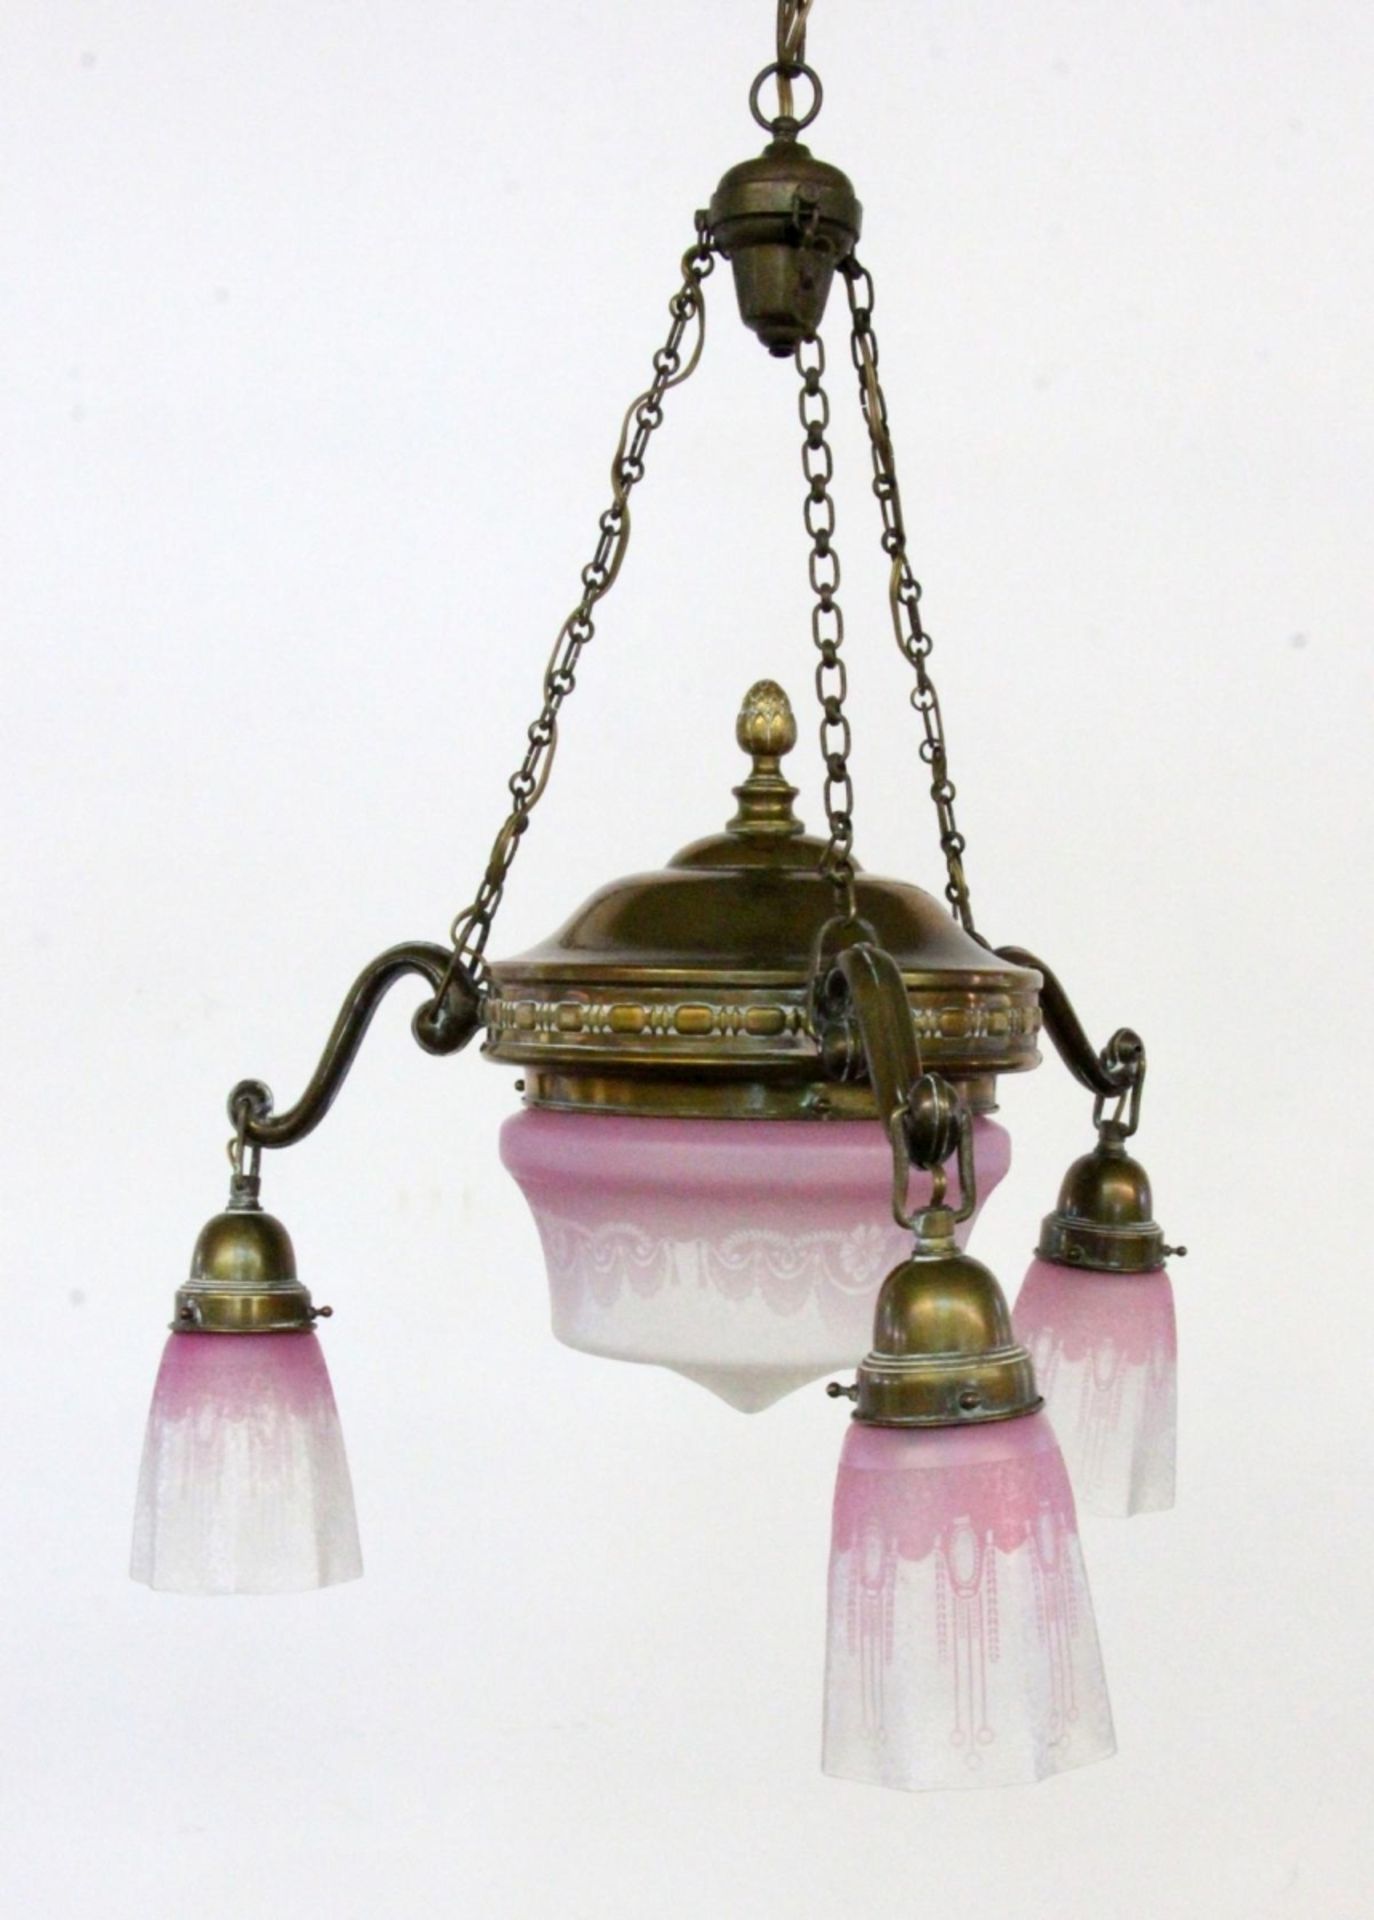 AN ART DECO HANGING LAMP France 1930s 3-light patinated brass frame. Middle bowl and 3